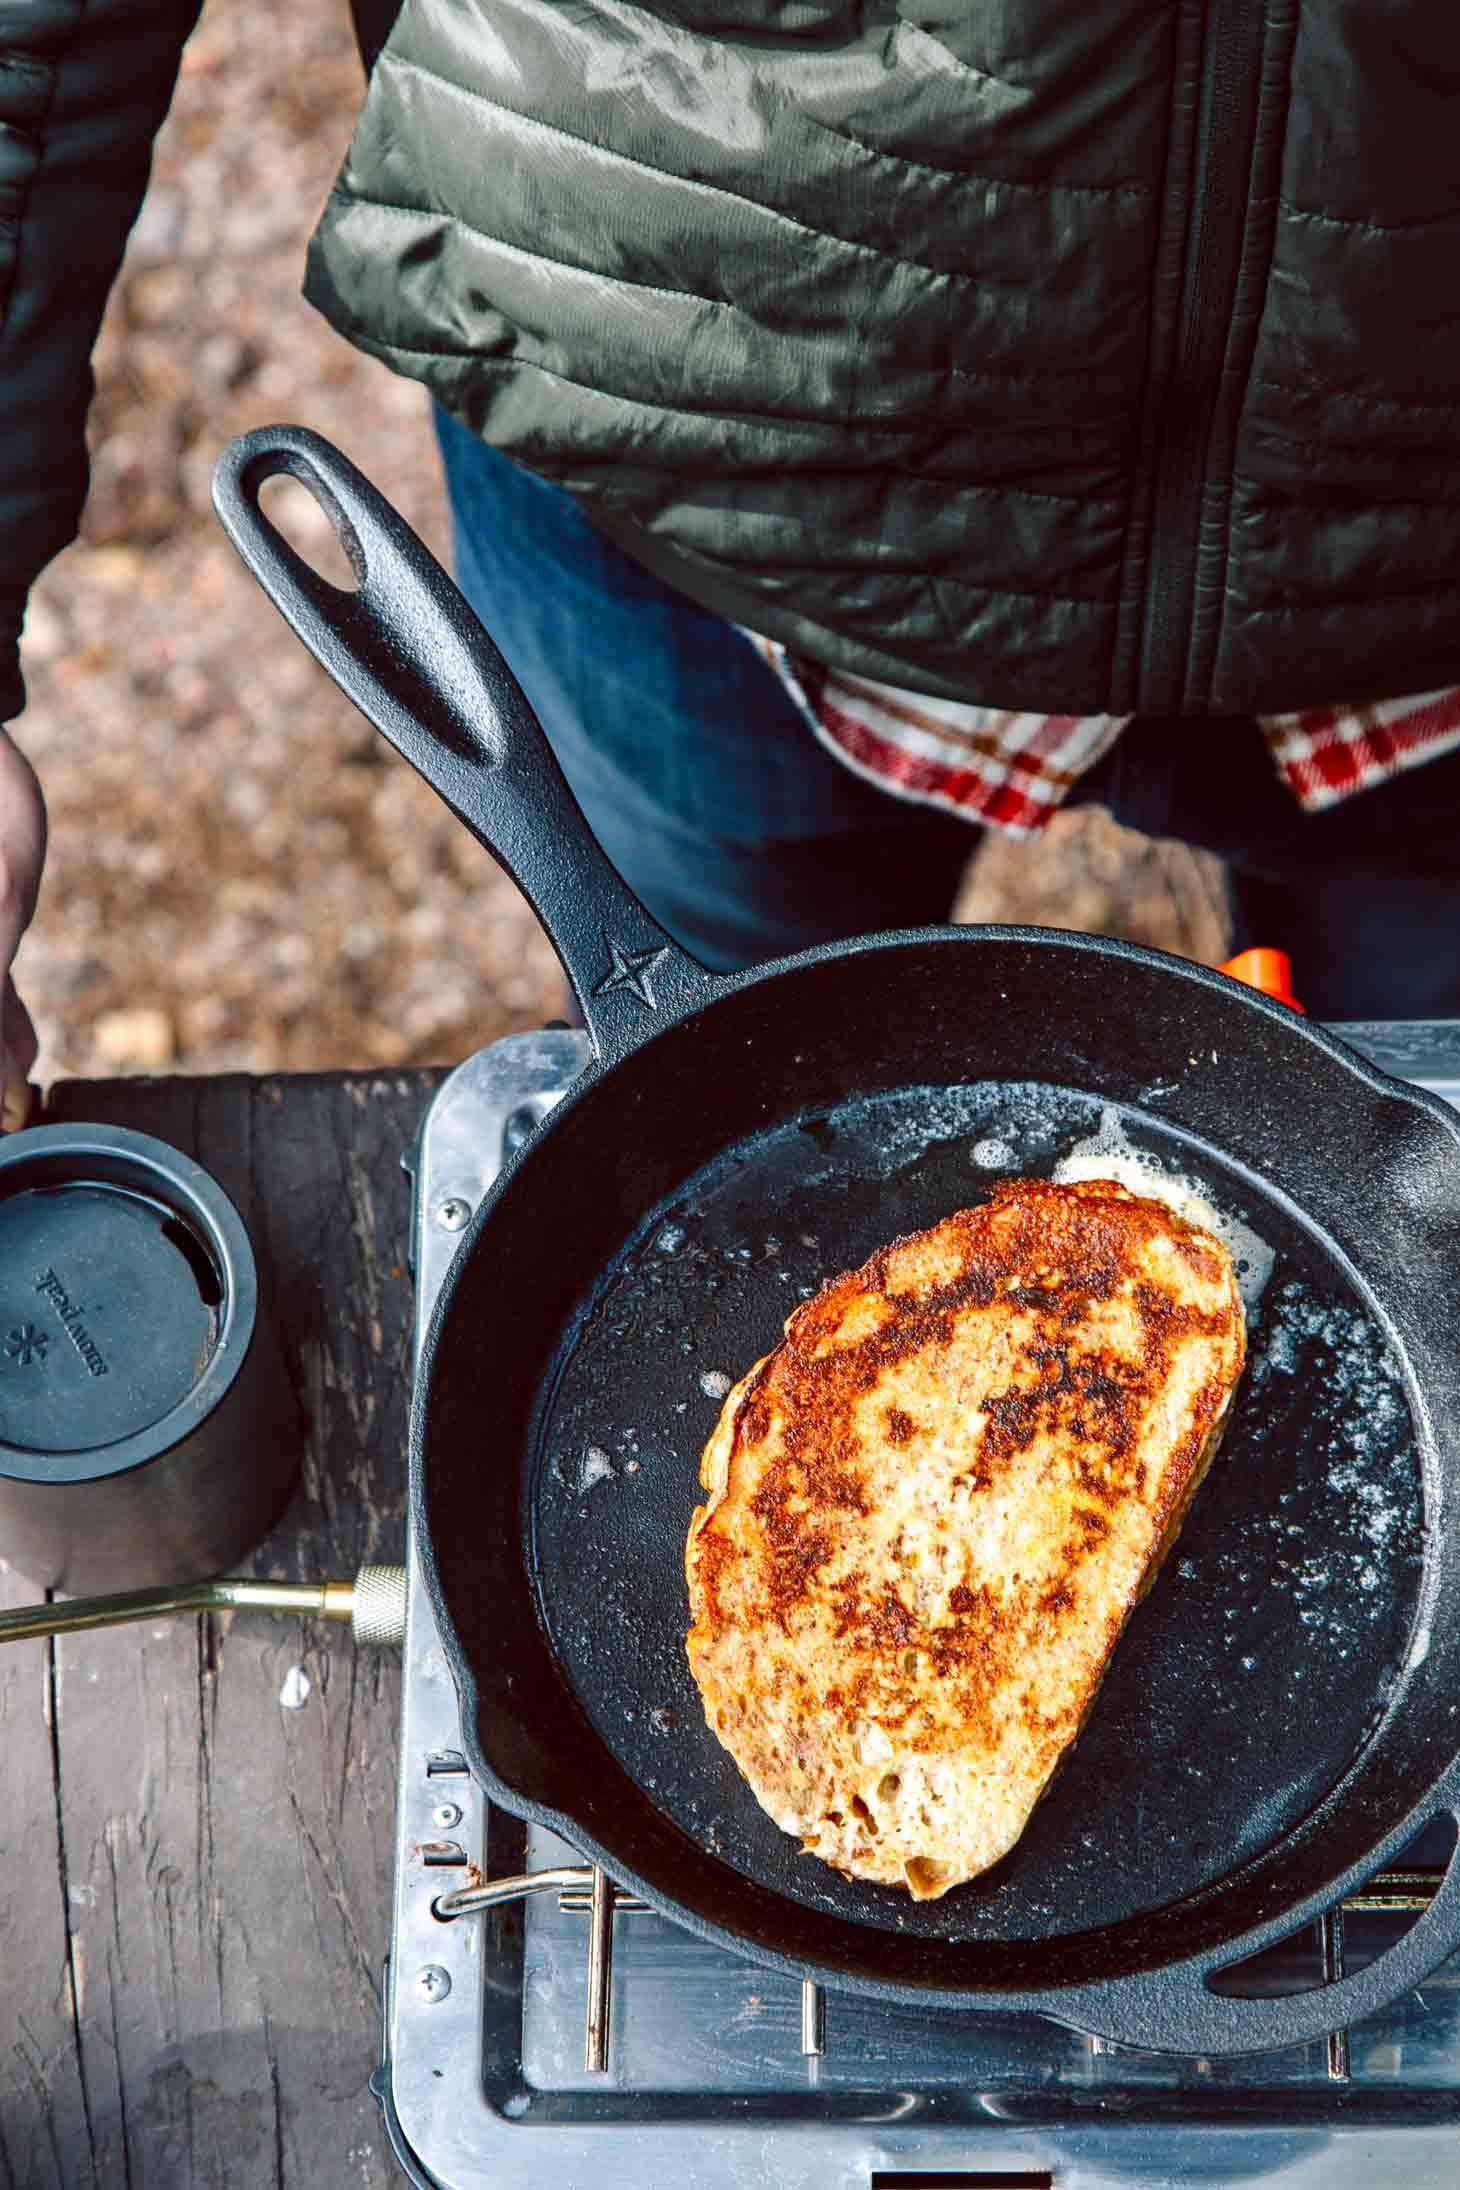 Camping French Toast
 How to Make Perfect French Toast While Camping